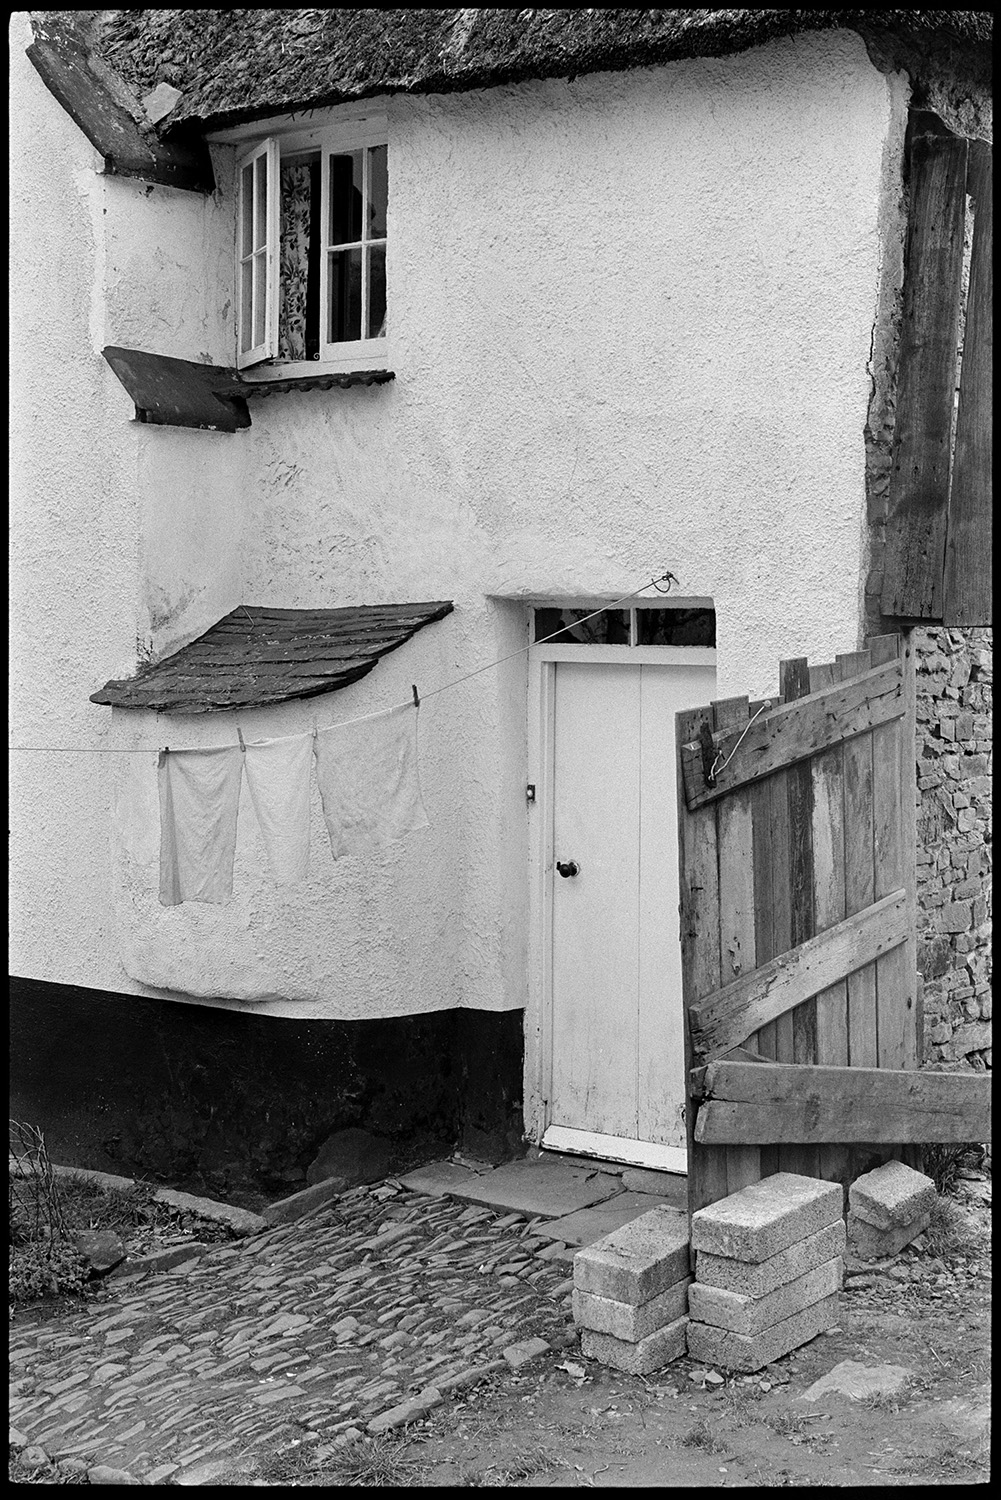 Side of cottage now renovated and ruined, cobbles, bread oven. 
[The cobbled entrance to a thatched cottage in Beaford. A bread oven can be seen next to the front door and washing is hung out to dry on a washing line outside. The cottage was later renovated,]